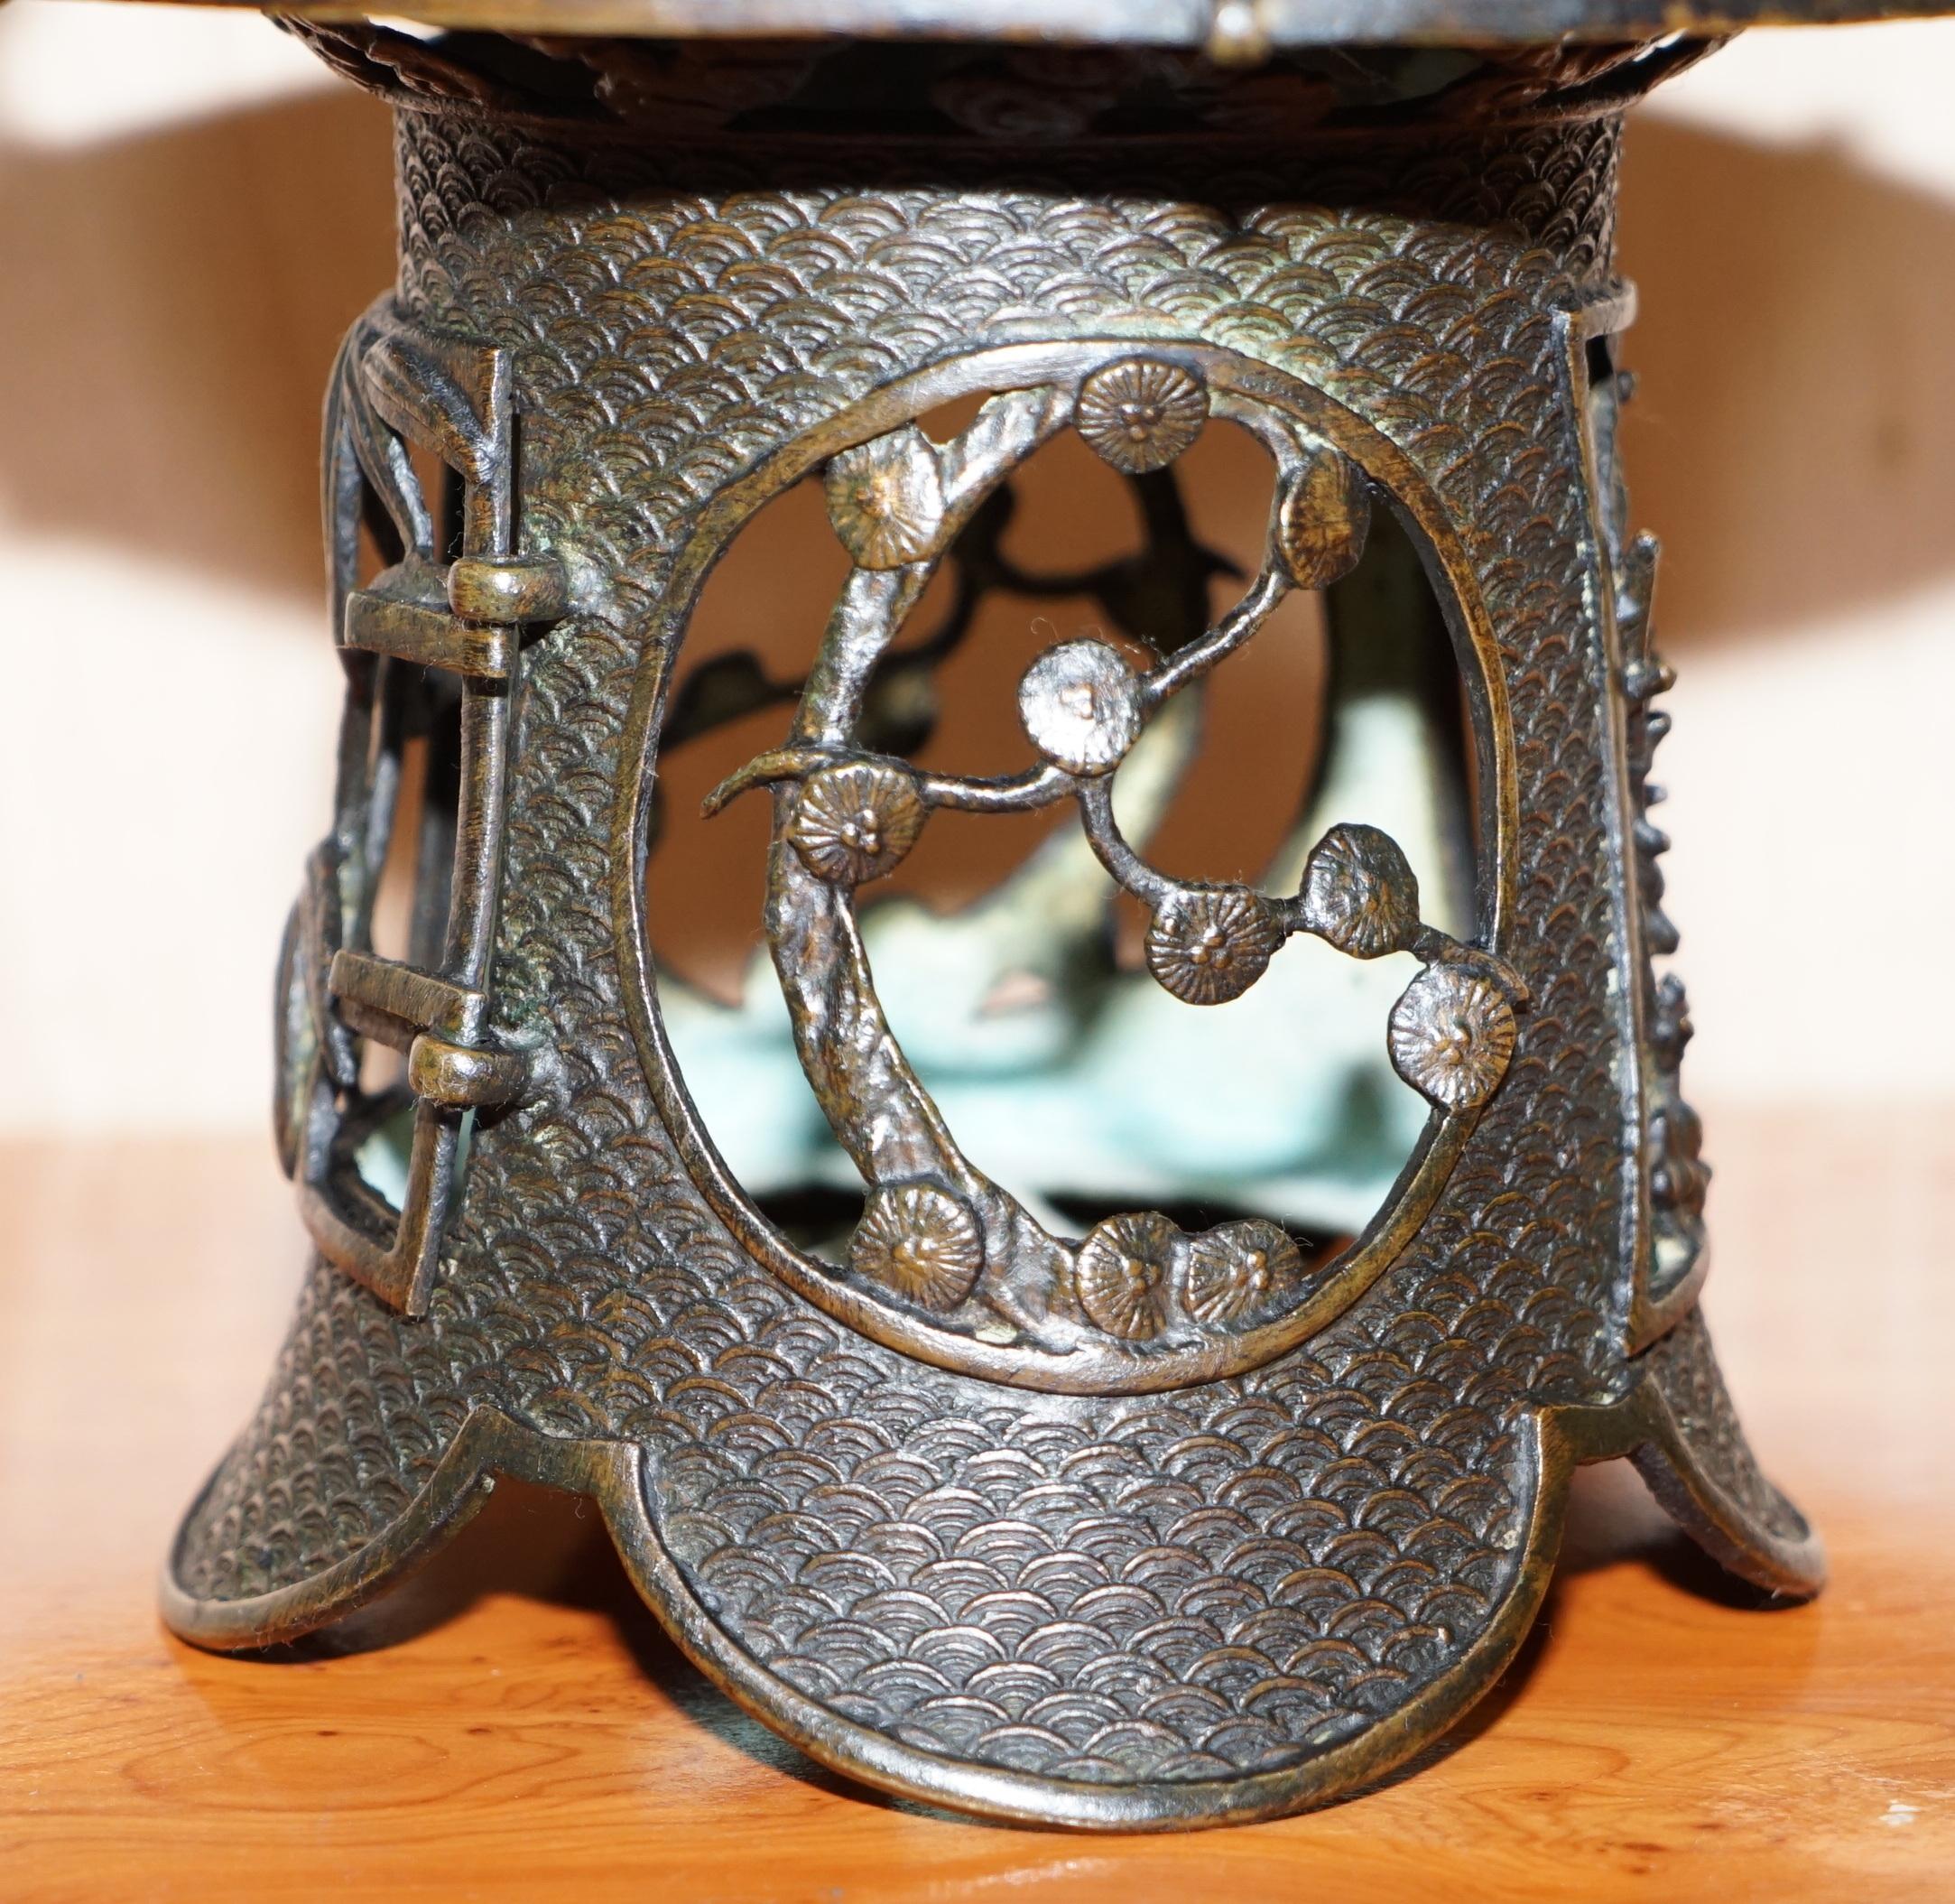 Rare Japanese Bronze circa 1930 Hanging Lantern Decorated with Floral Scenes 8